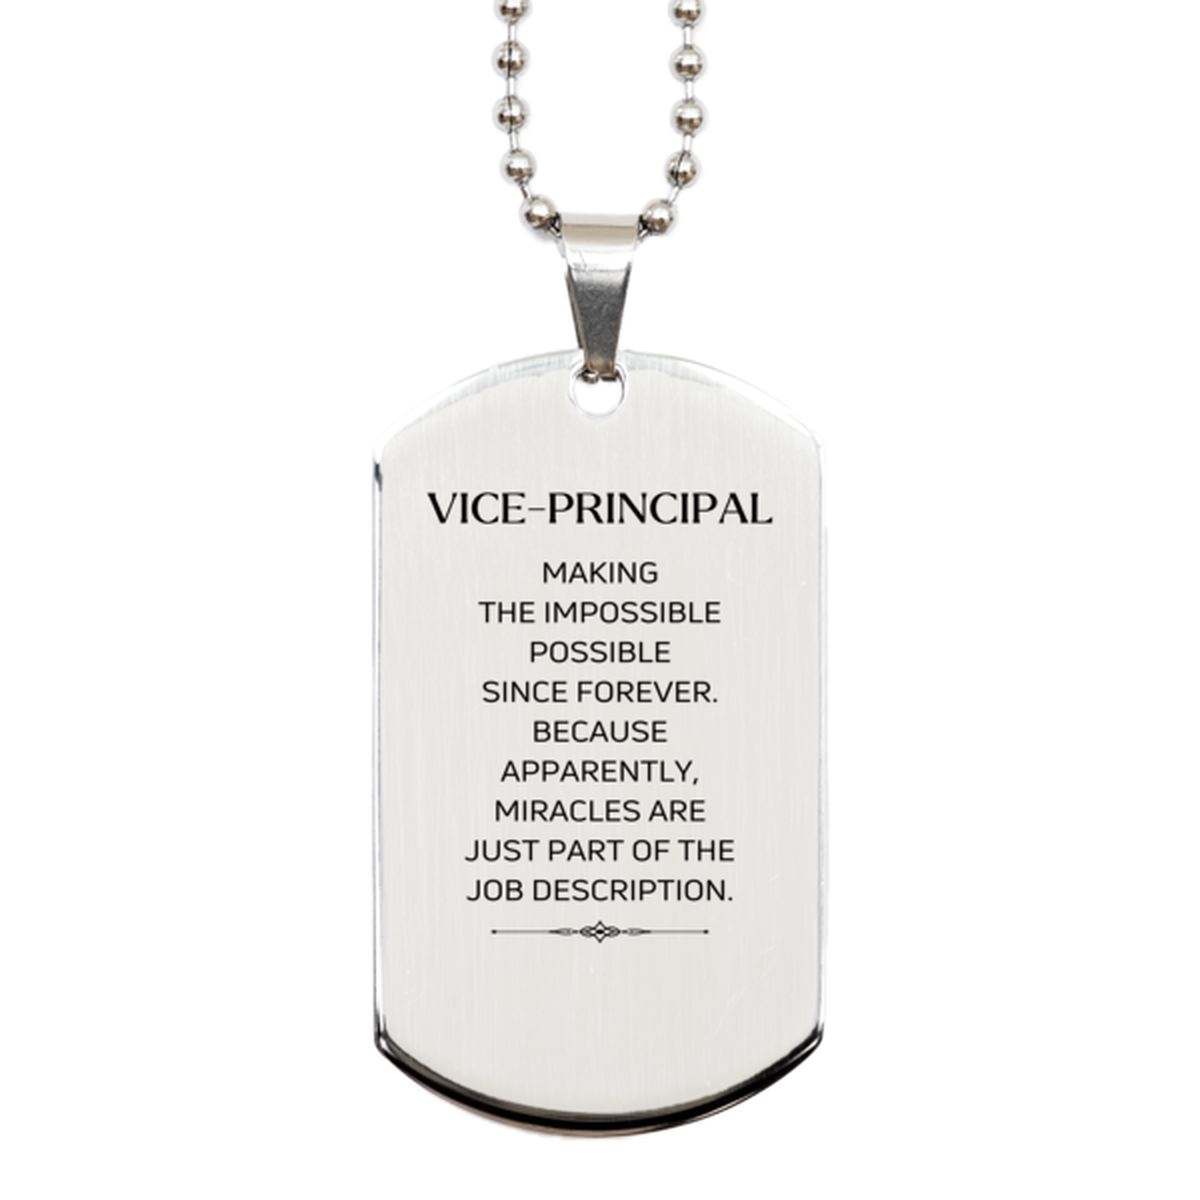 Funny Vice-principal Gifts, Miracles are just part of the job description, Inspirational Birthday Silver Dog Tag For Vice-principal, Men, Women, Coworkers, Friends, Boss